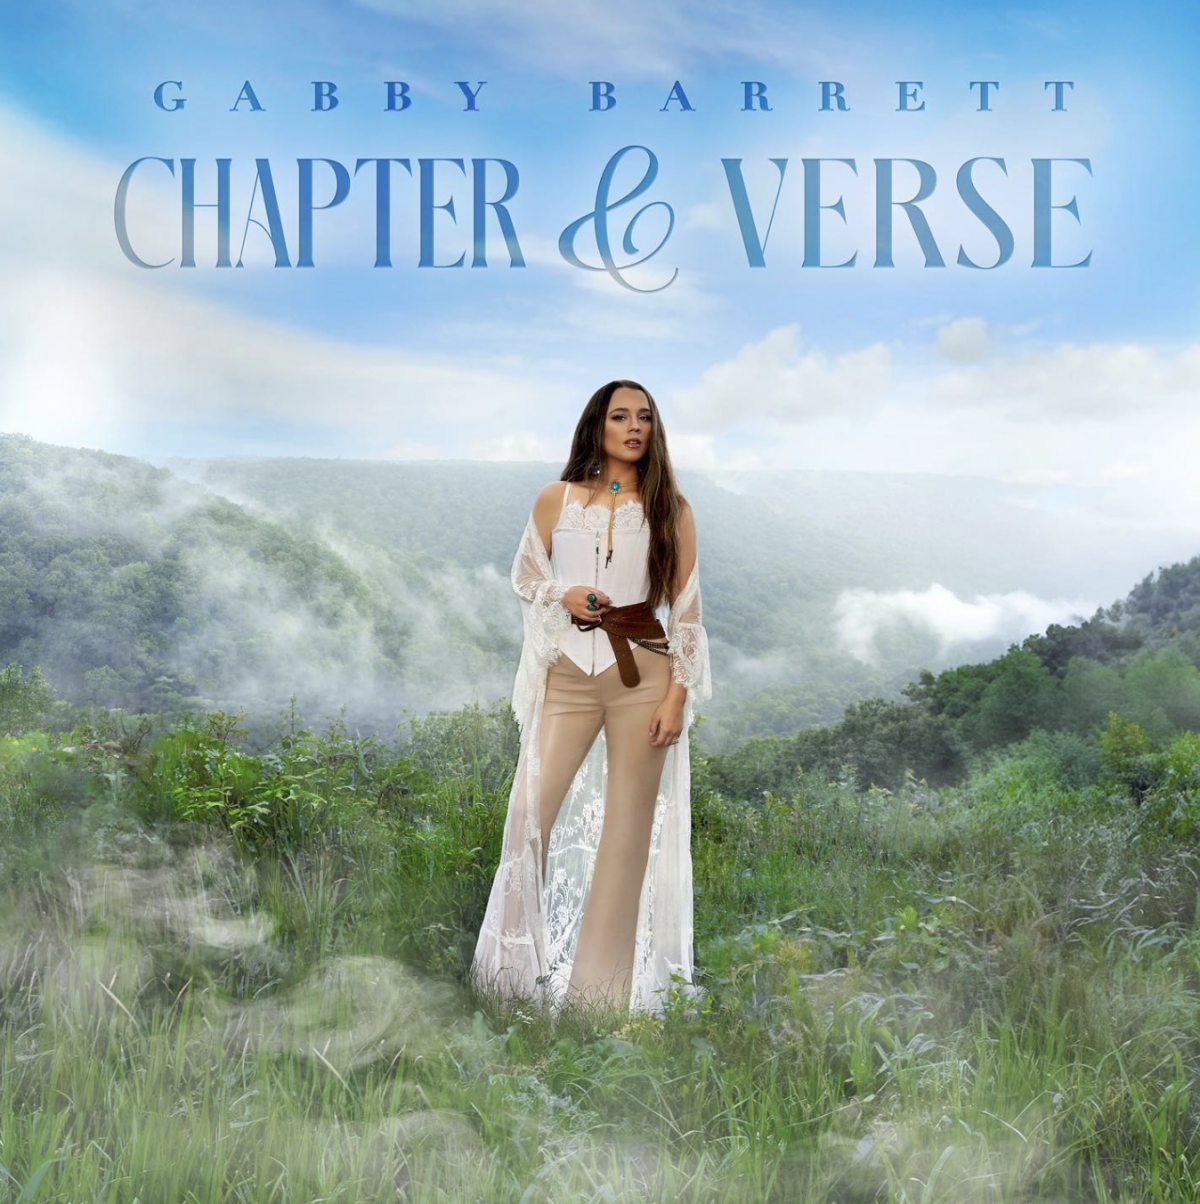 Gabby Barrett opens up about marriage ahead of new album release